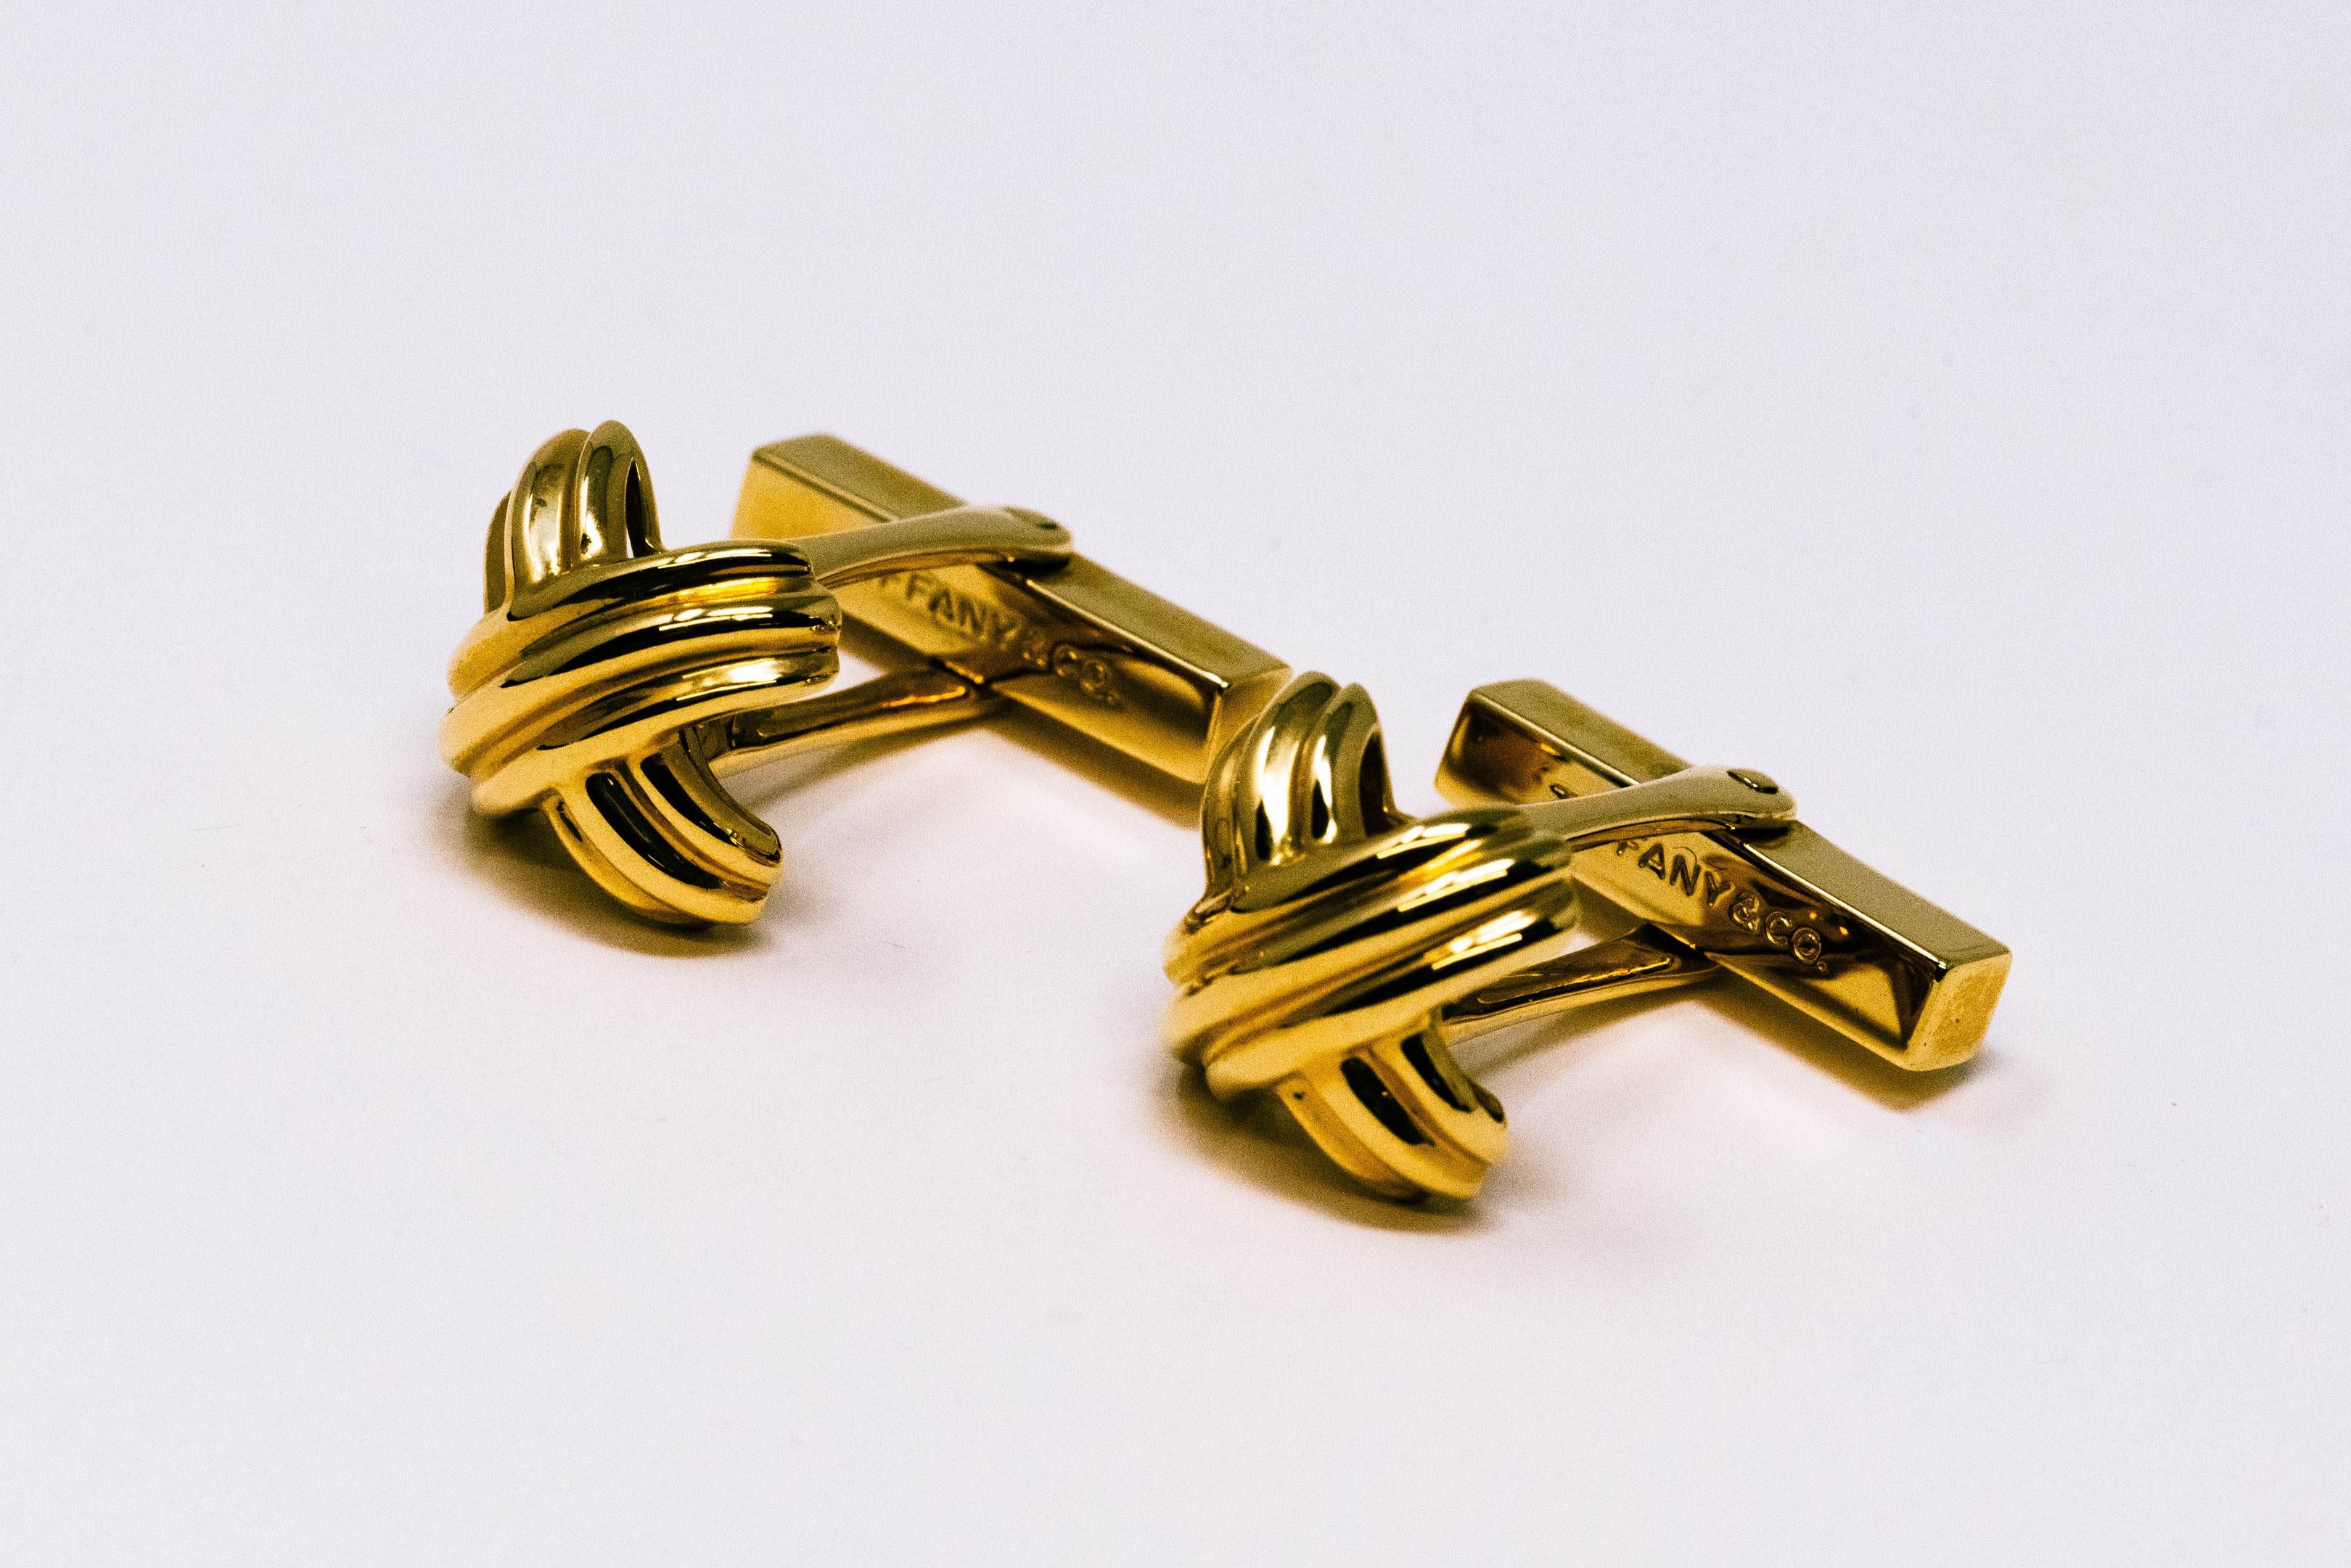 Pair of Tiffany & Co. 18k gold Signature X cufflinks. Fully marked 750, circa 1992. Comes with the box, measures 1 1/4 inches long with bar extended, face is 1/2 inch x 1/2 inch.